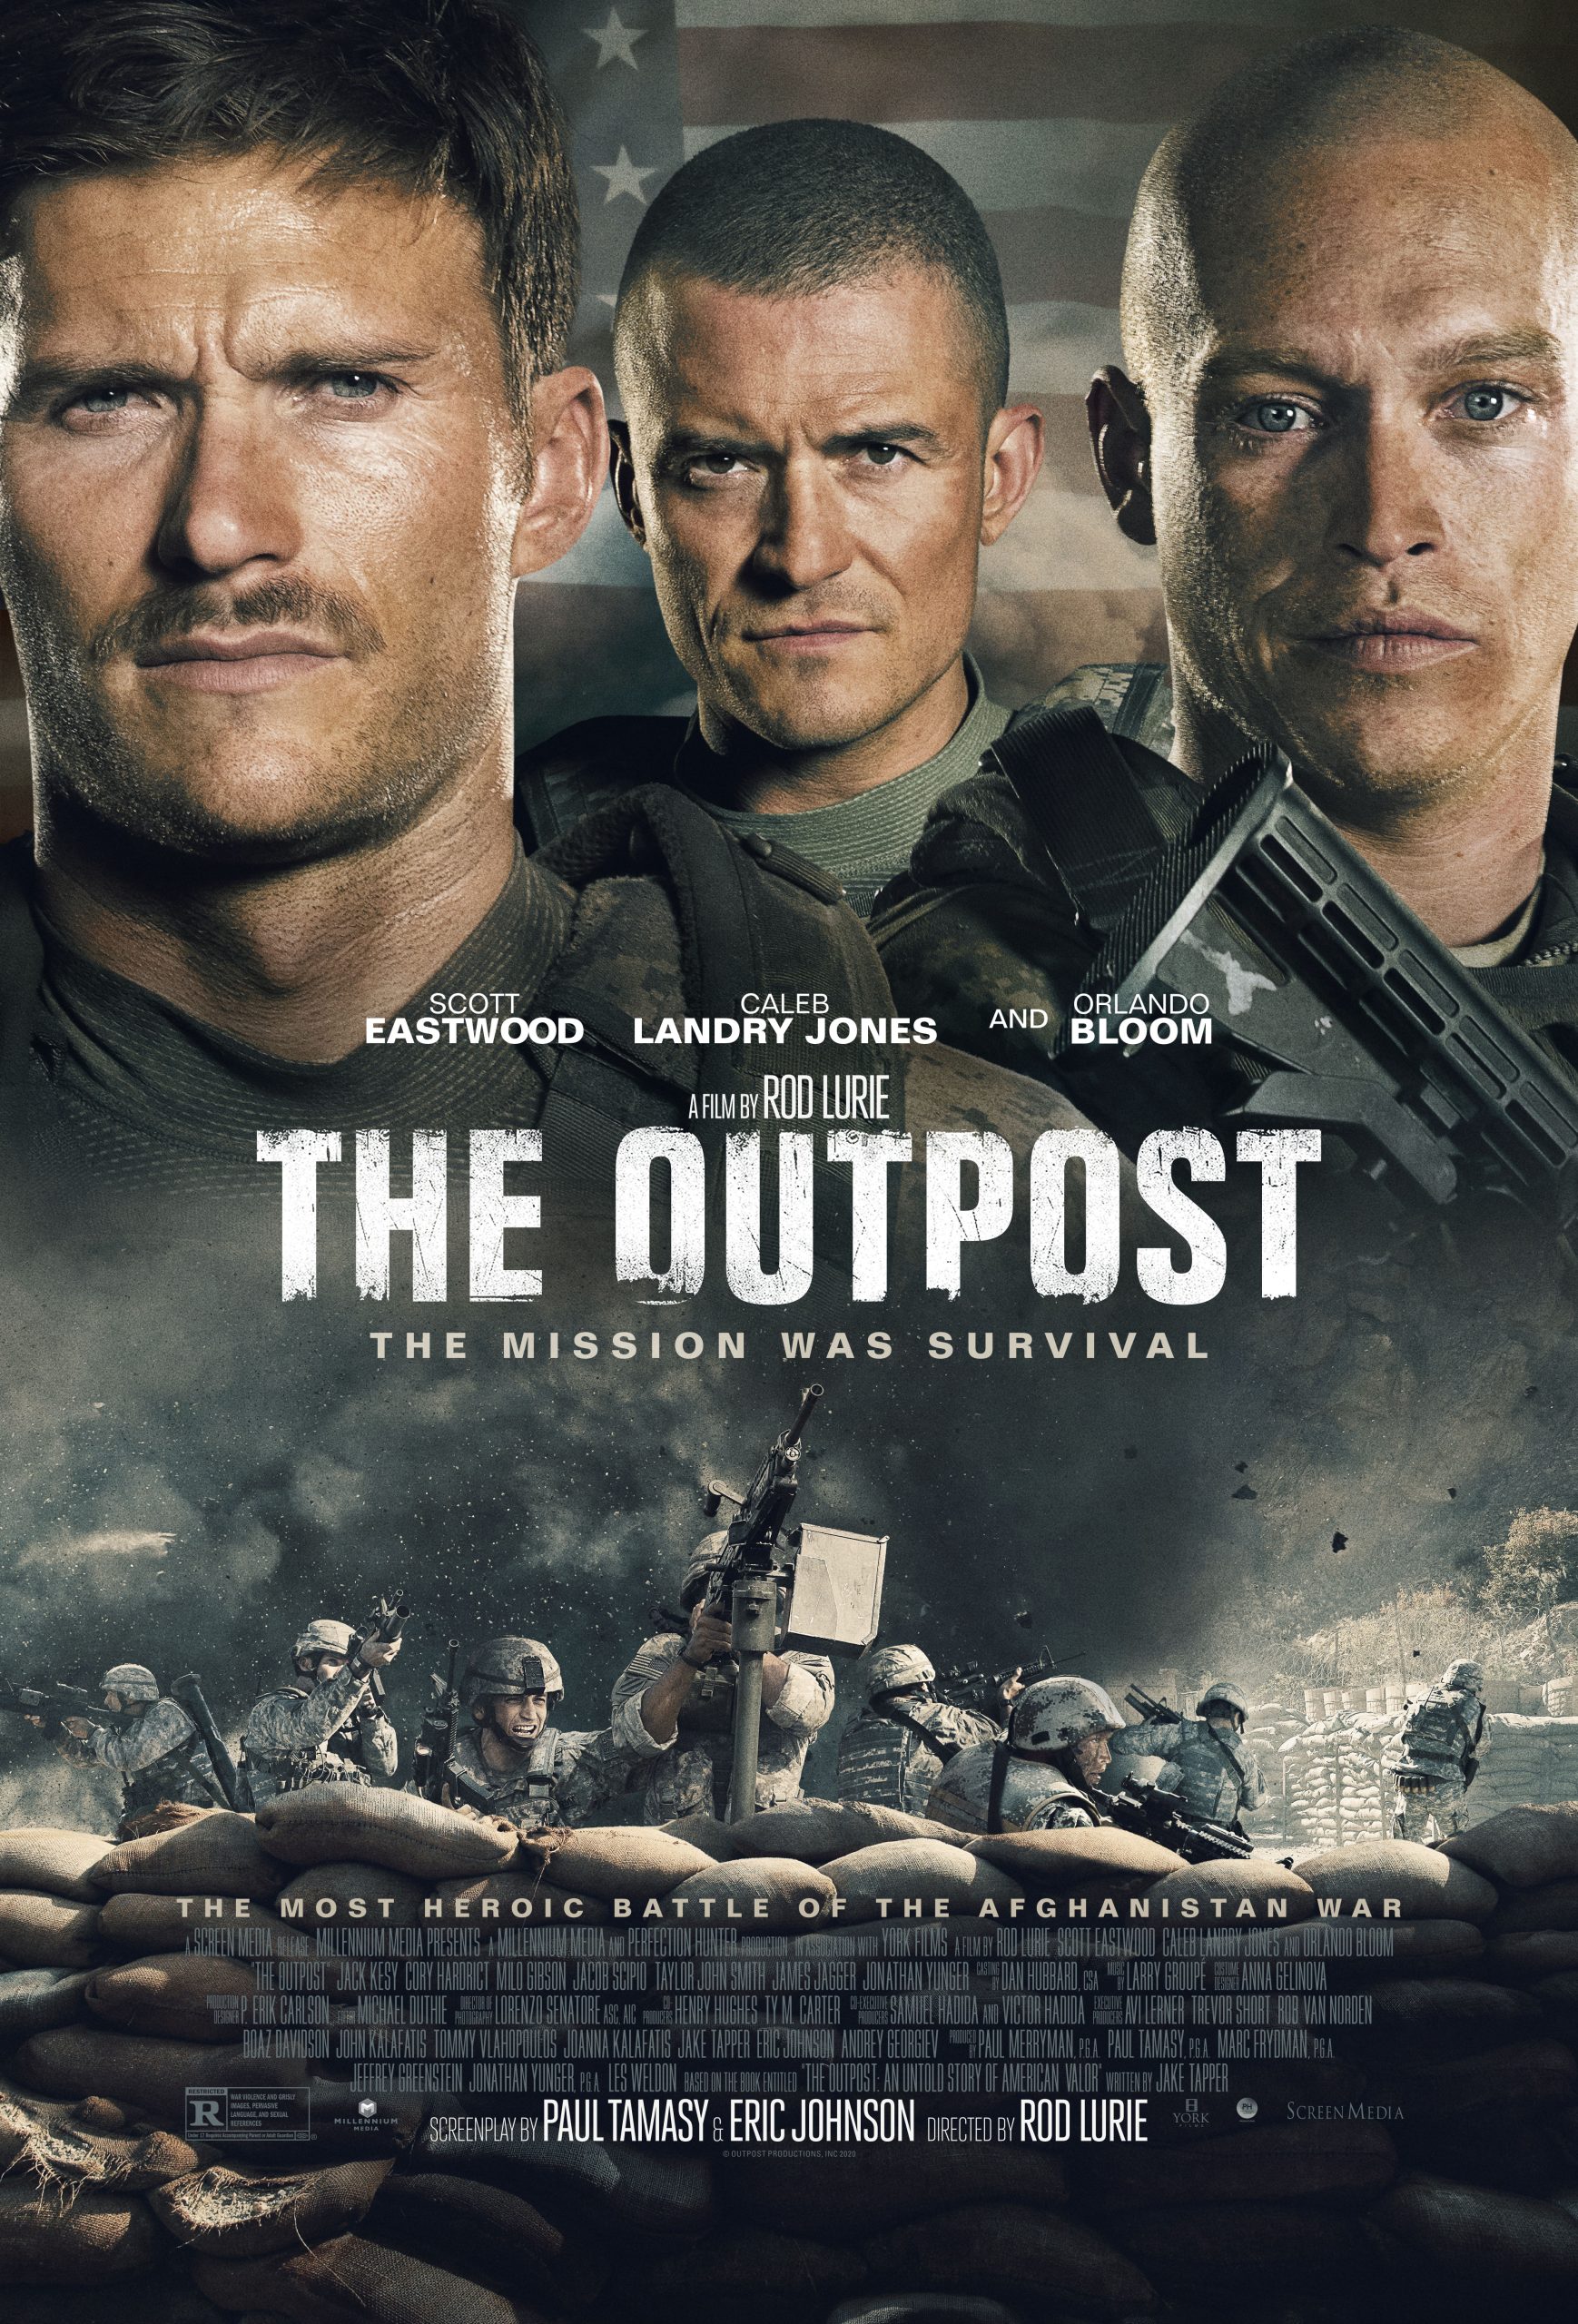 The Outpost (2020) Scott Eastwood